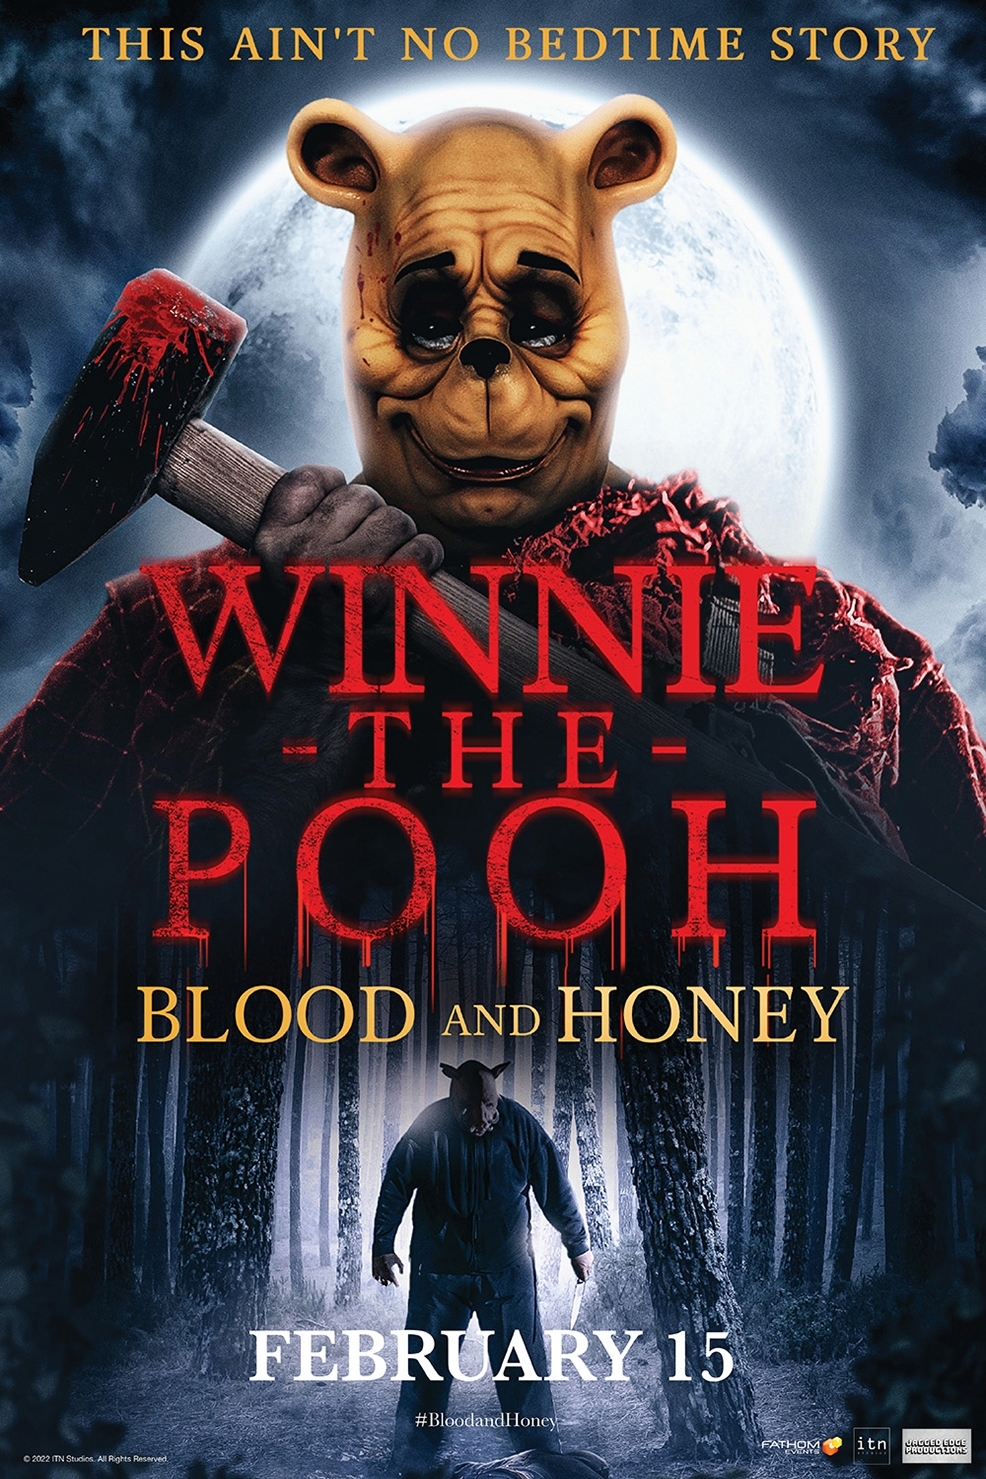 Still of Winnie-the-Pooh: Blood and Honey